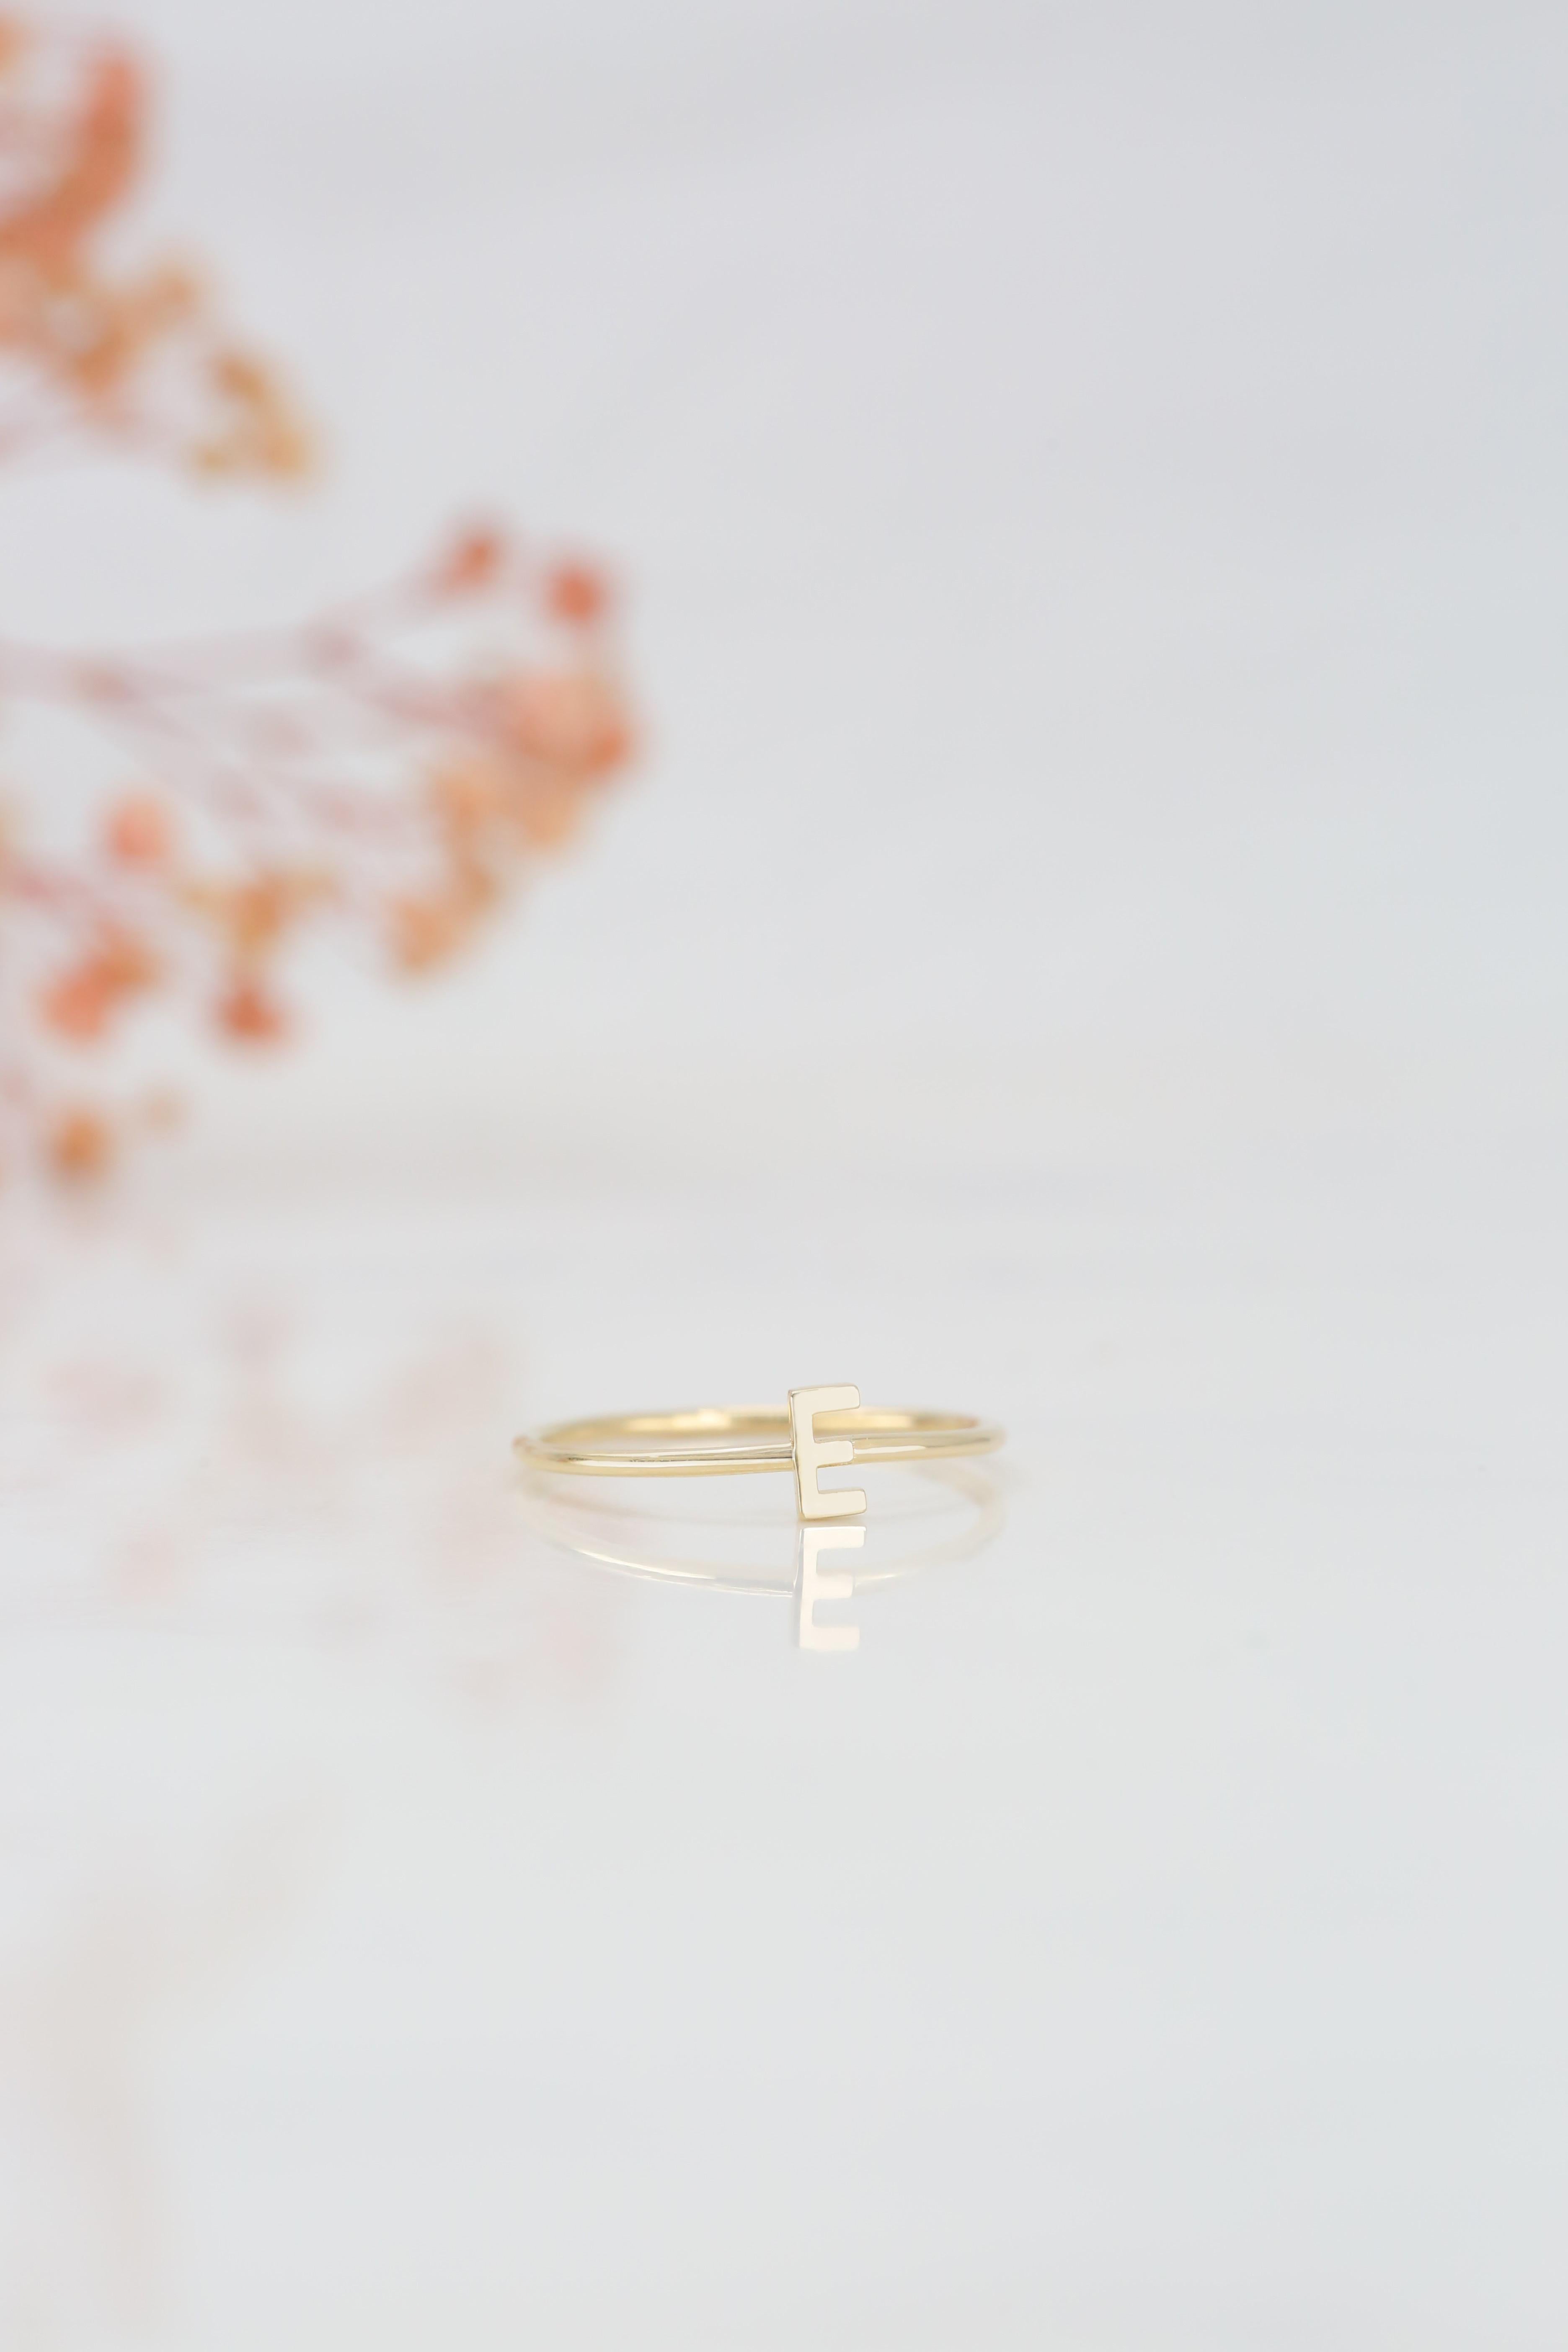 For Sale:  14K Gold Initial E Letter Ring, Personalized Initial Letter Ring 5